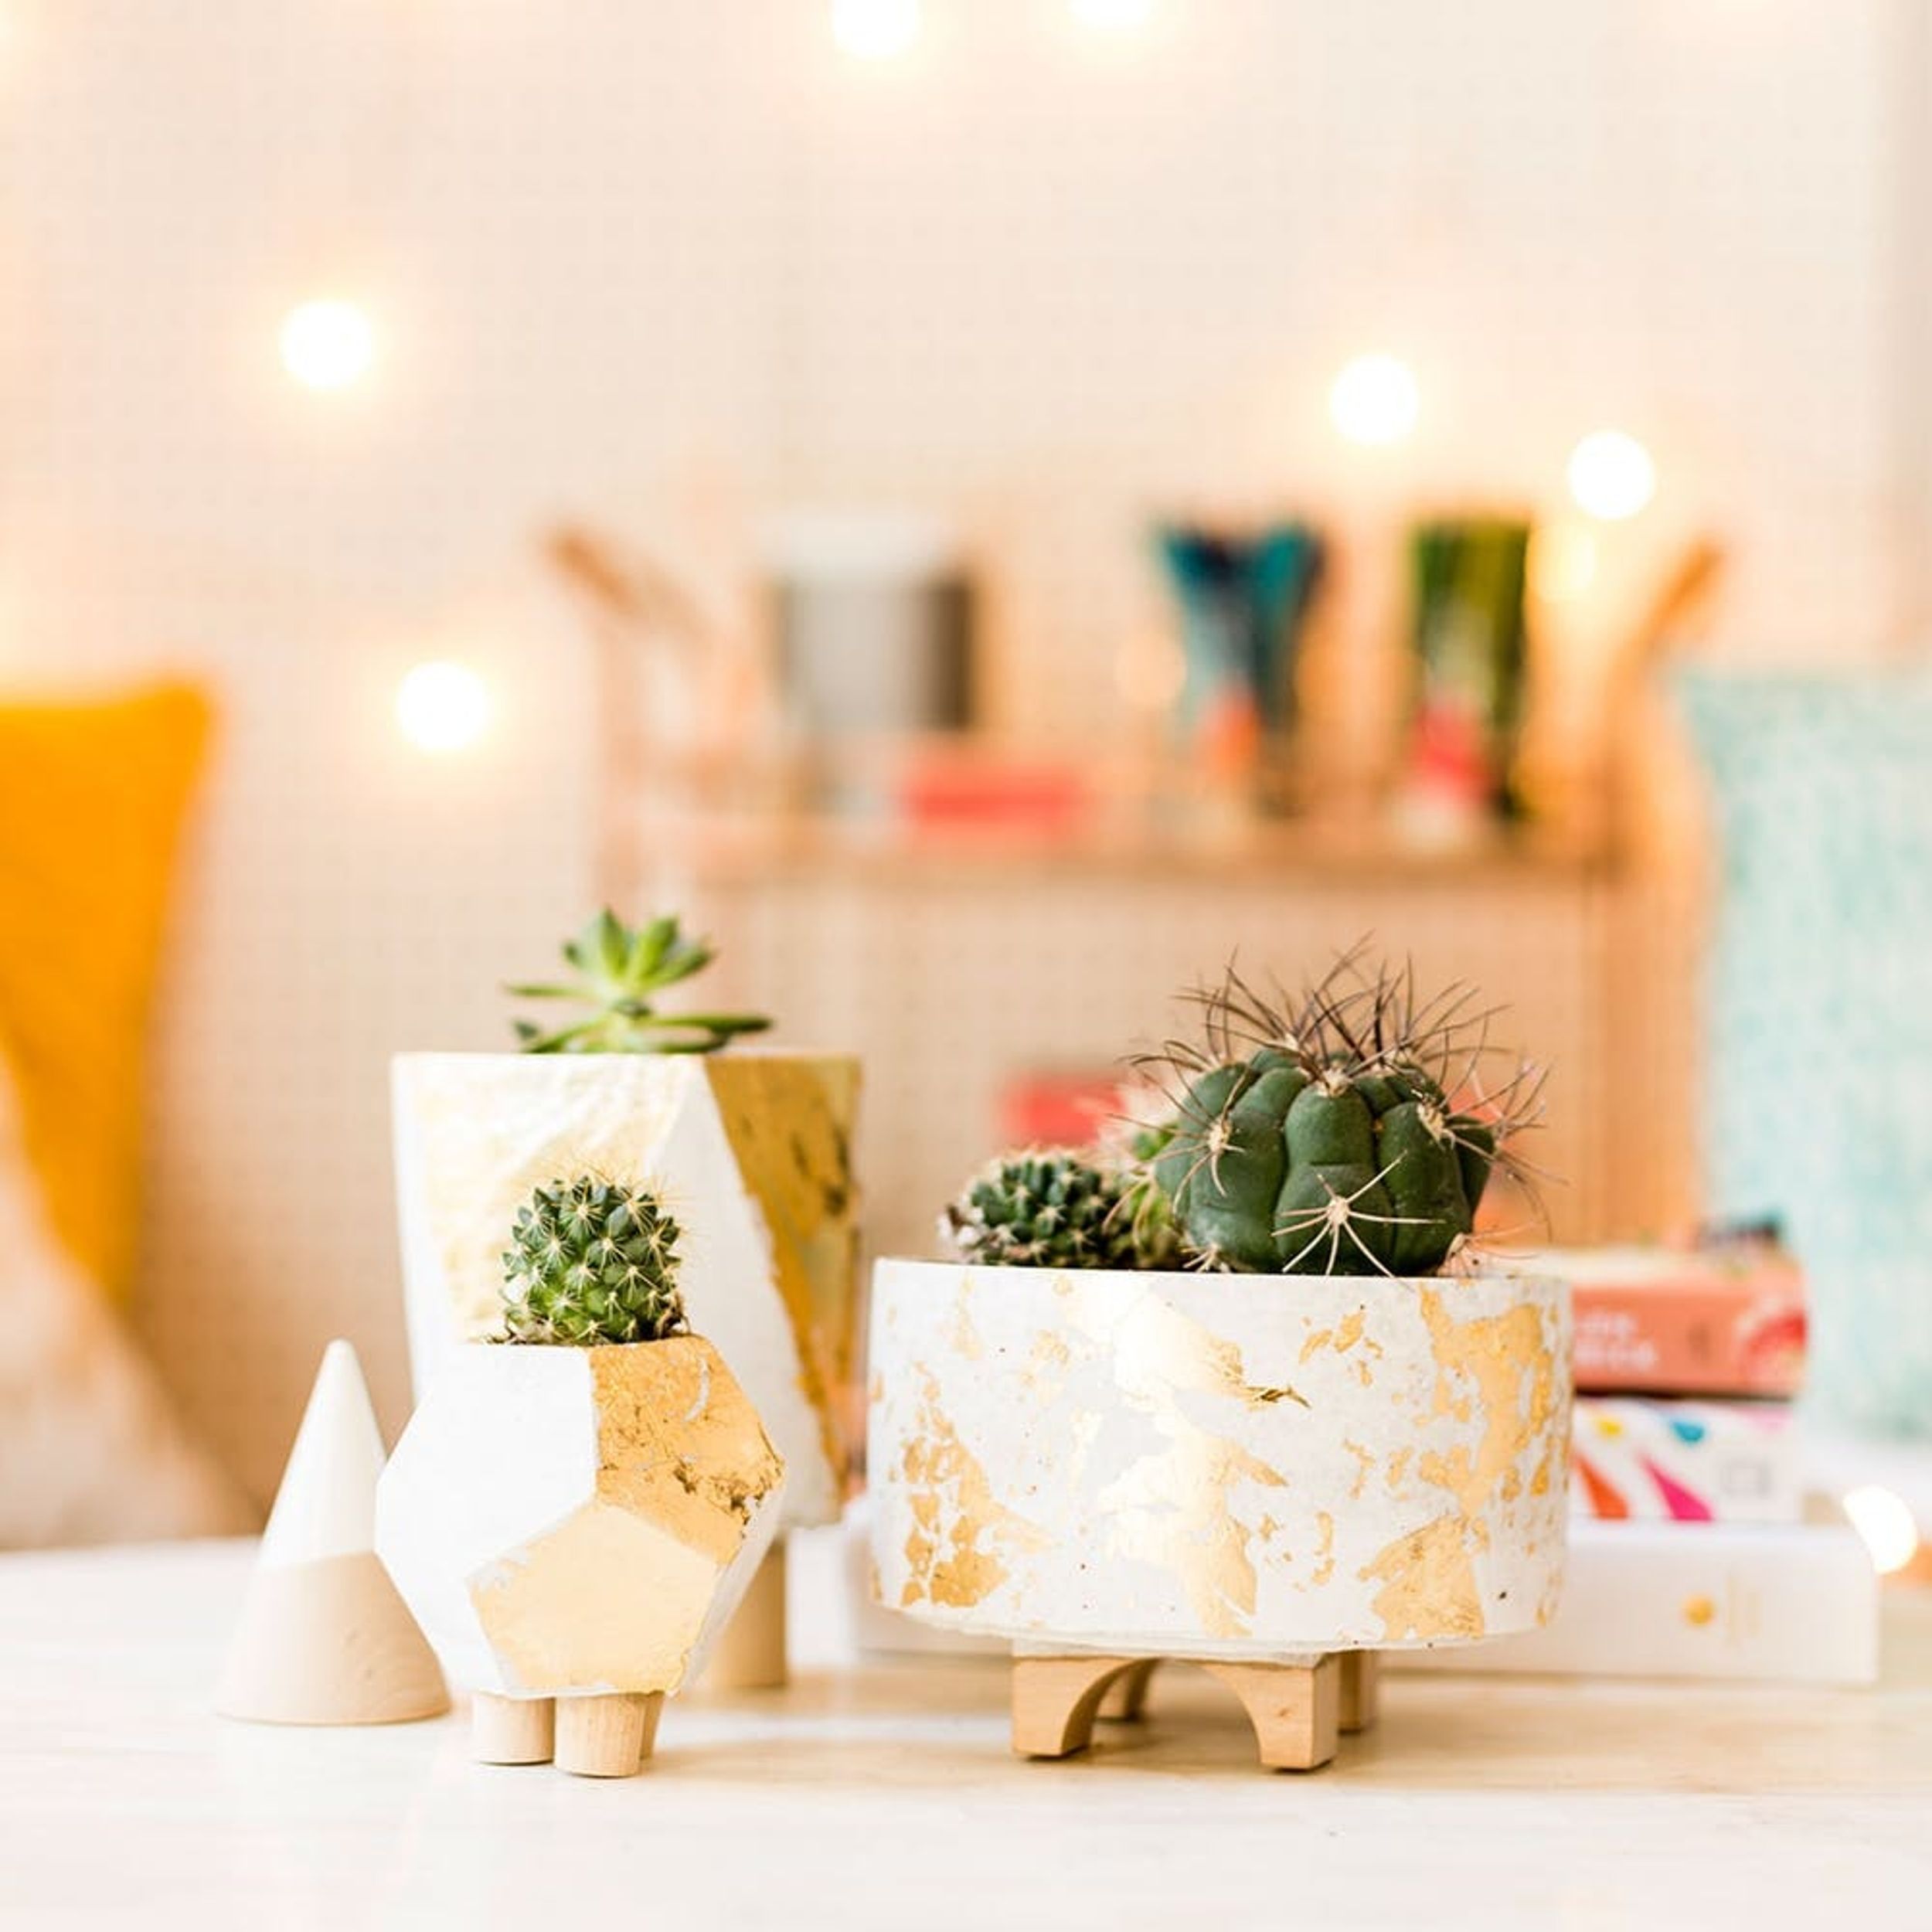 No Need to Be a DIY Expert: These Gold Cement Planters Are Foolproof